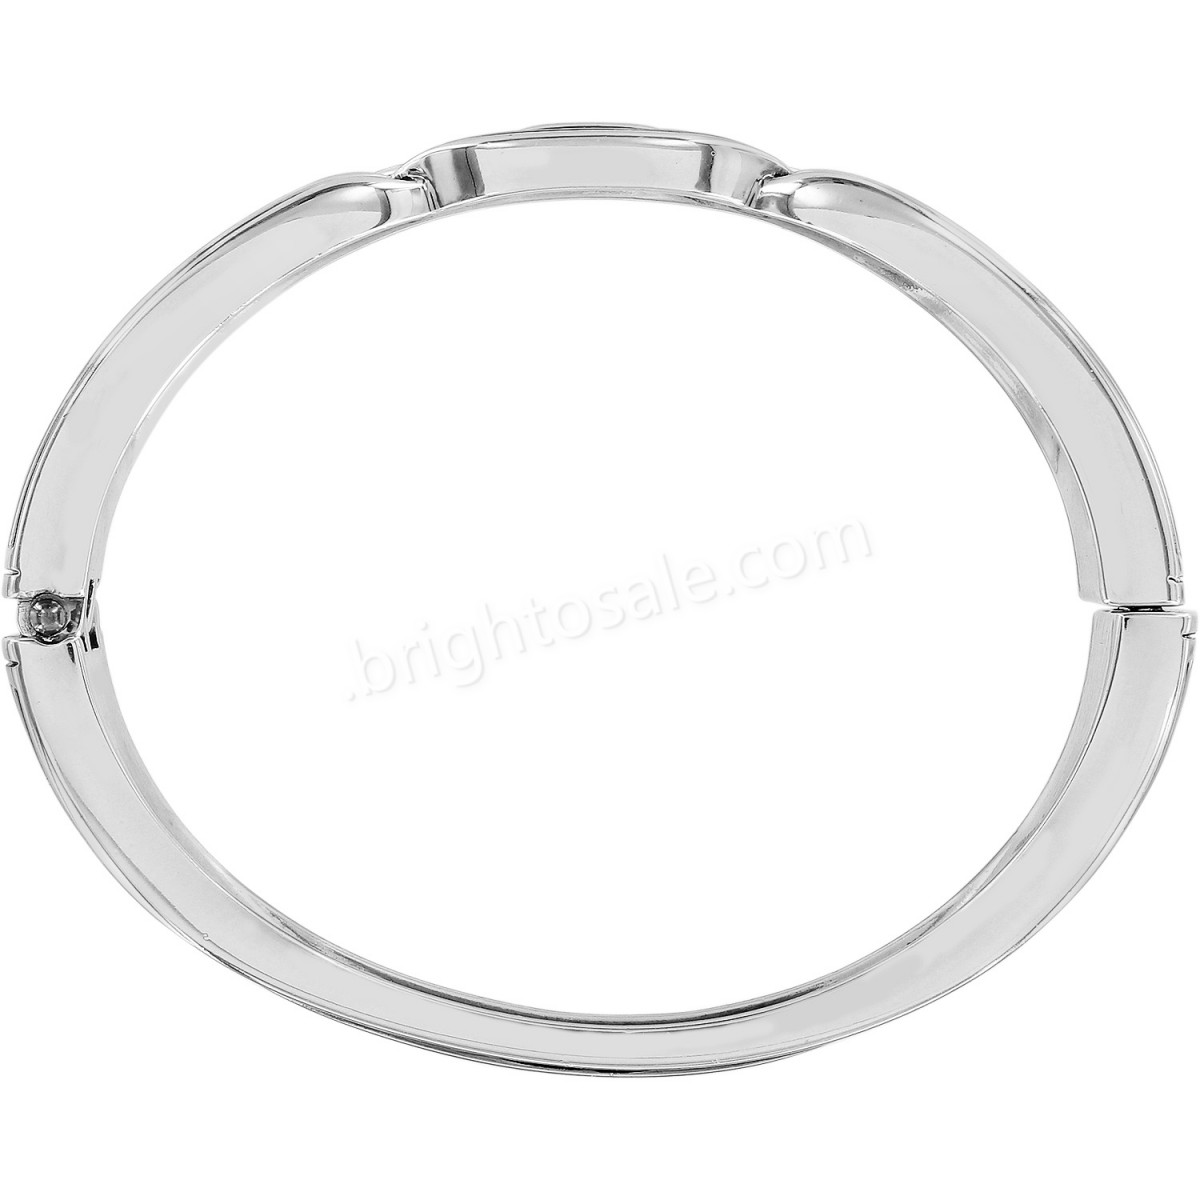 Brighton Collectibles & Online Discount Intertwine Hinged Bangle - -1